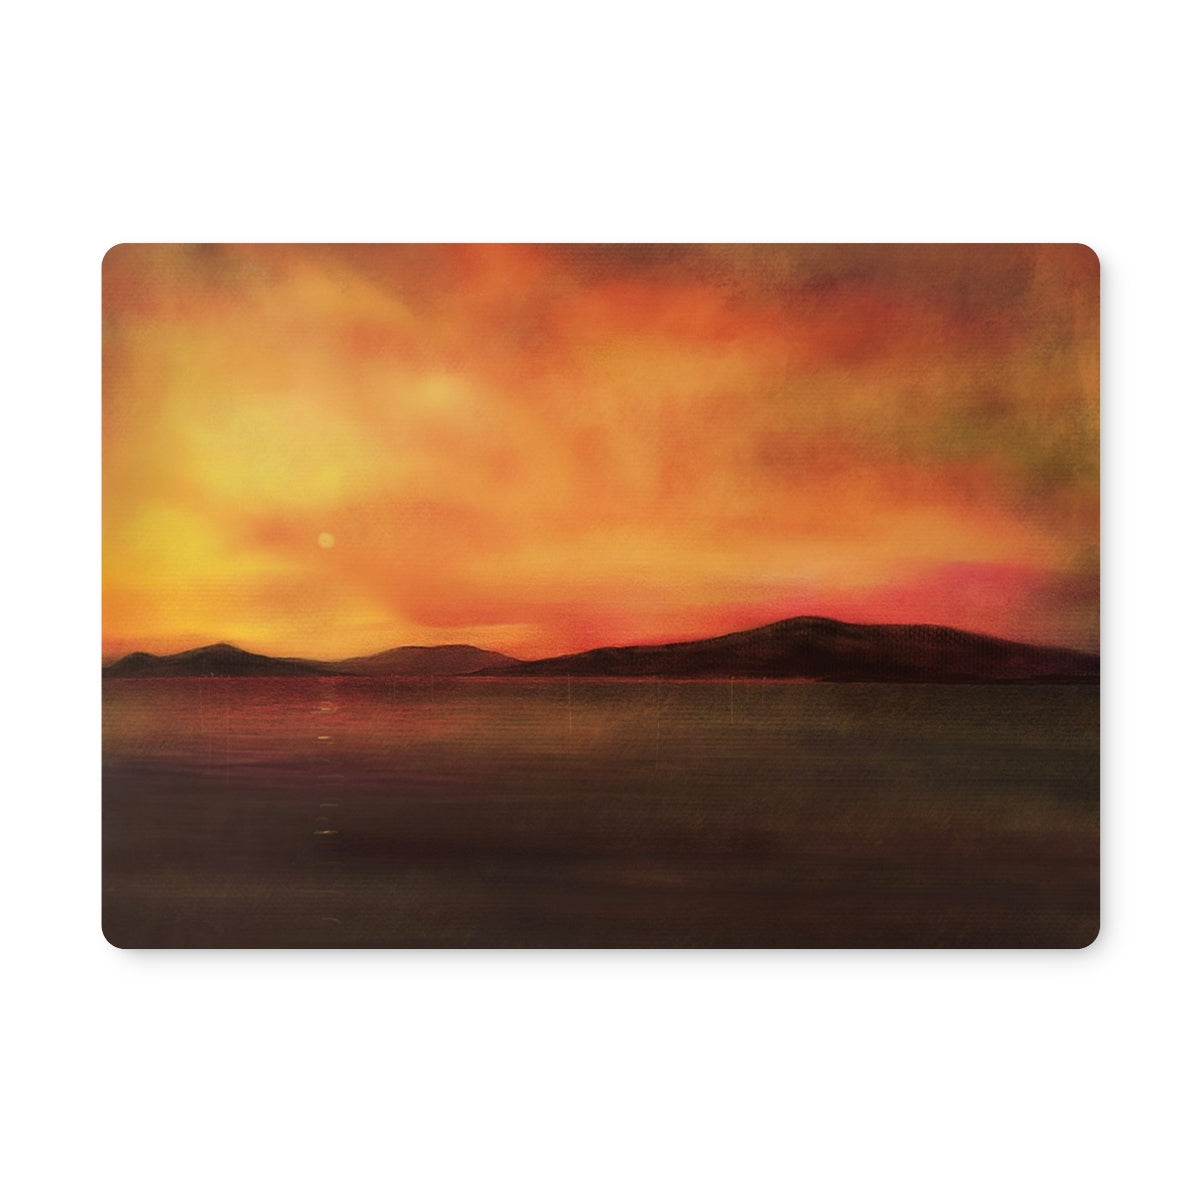 Harris Sunset Art Gifts Placemat-Placemats-Hebridean Islands Art Gallery-Single Placemat-Paintings, Prints, Homeware, Art Gifts From Scotland By Scottish Artist Kevin Hunter